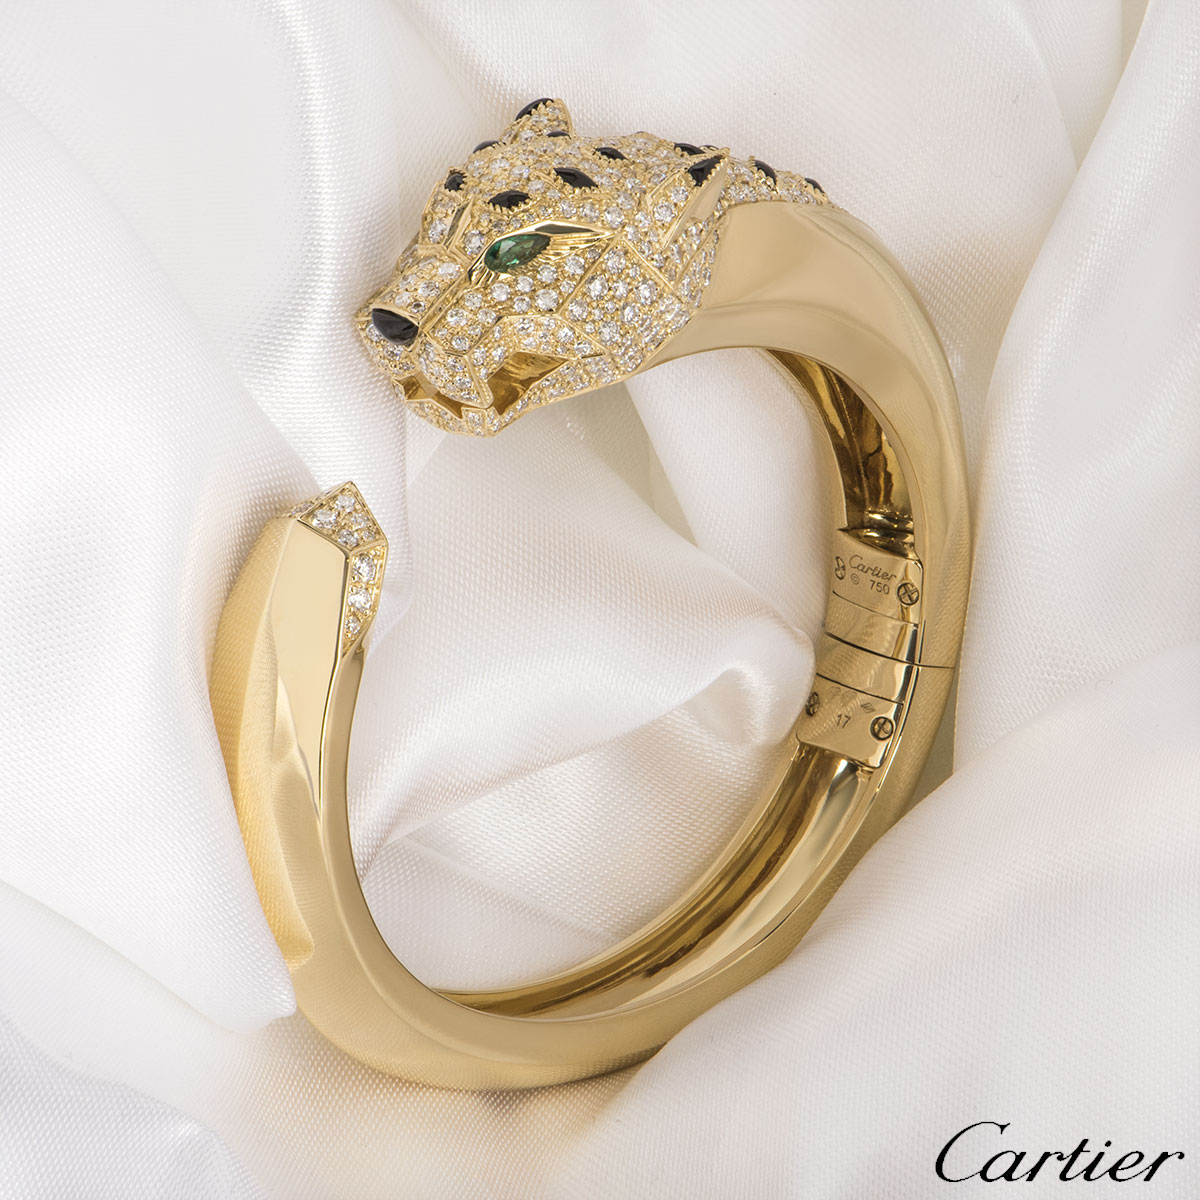 cartier panthere yellow gold bracelet